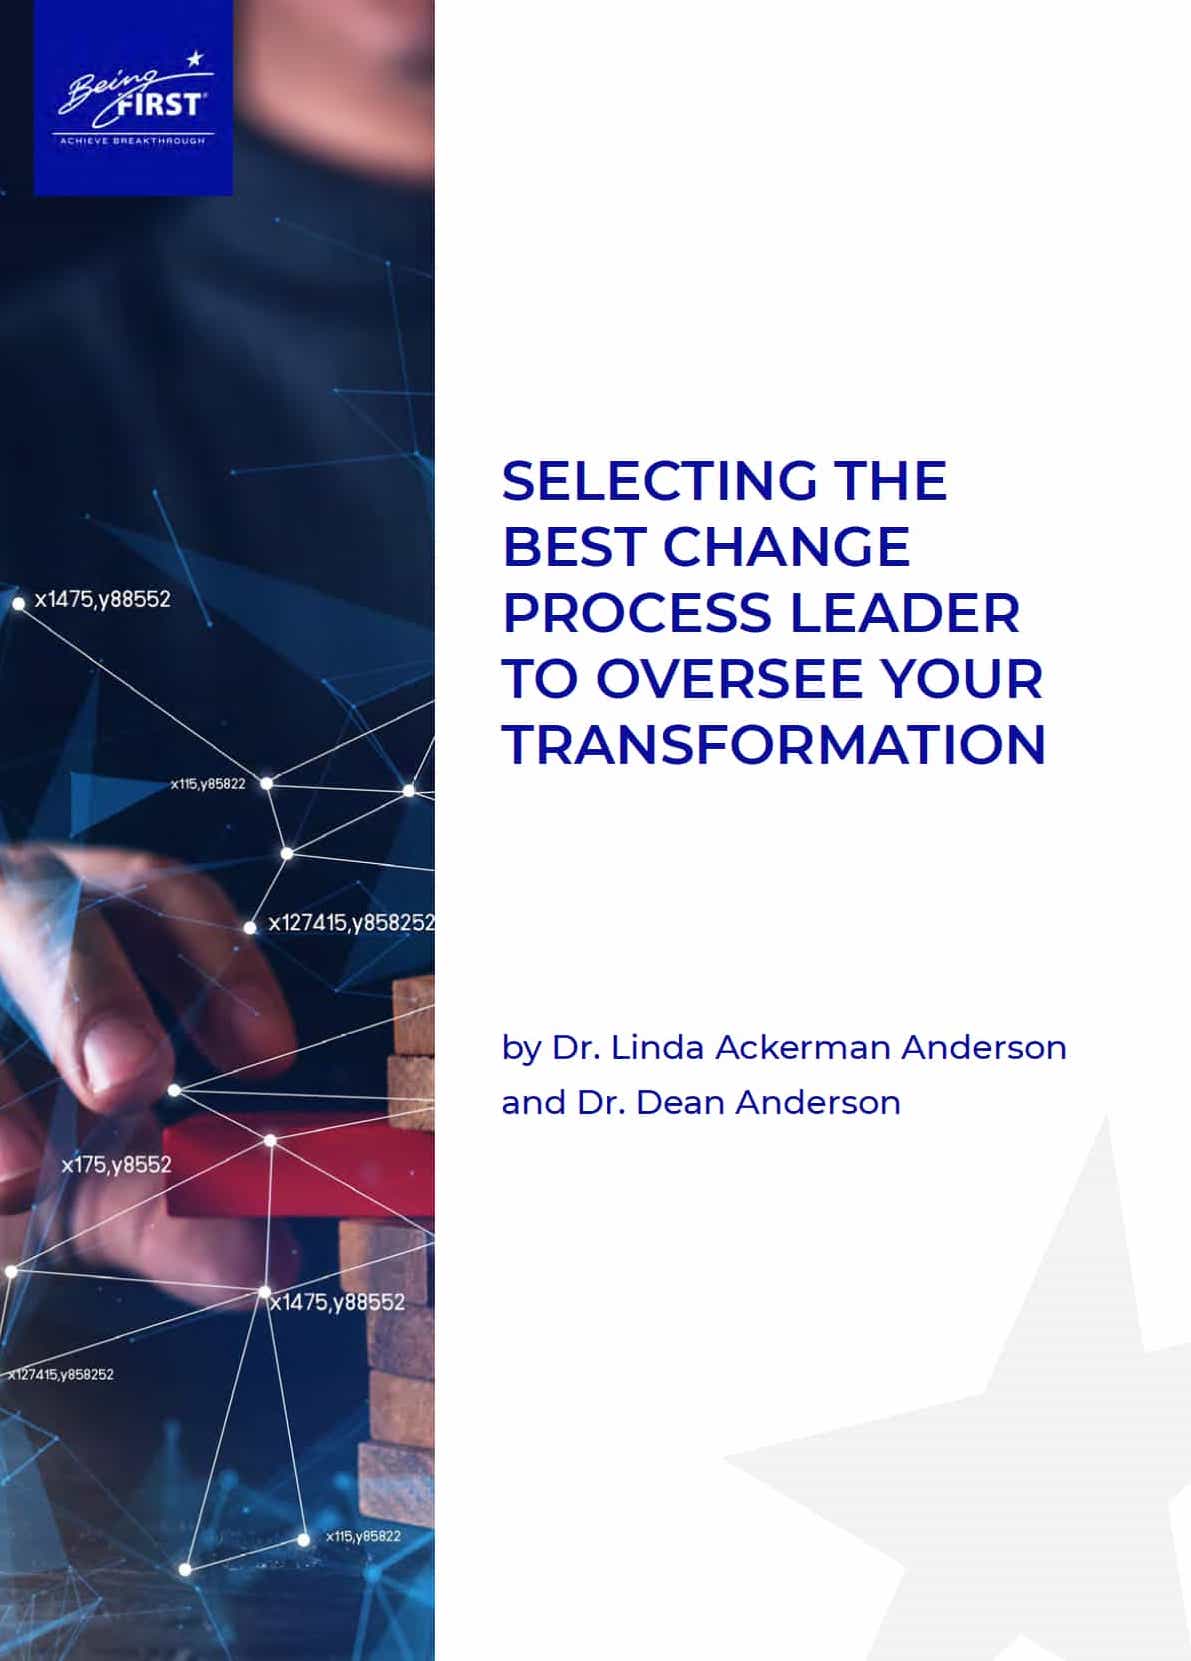 How to Select the Best Change Process Leader to Oversee Your Transformation